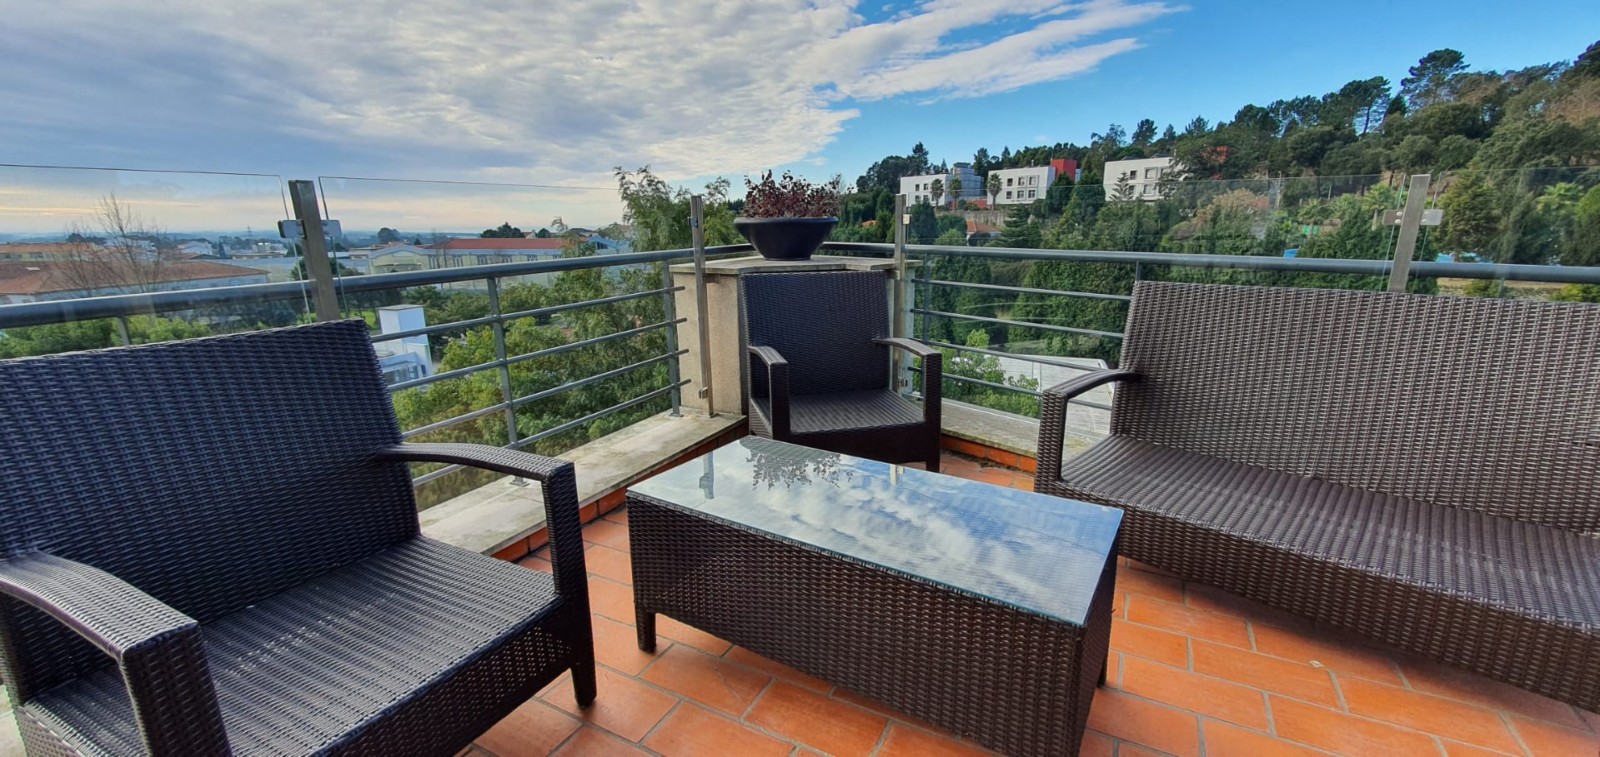 Sale: 5 Bedroom Penthouse with terrace and pool, in Carvalhos, V. N. Gaia, Portugal_218732